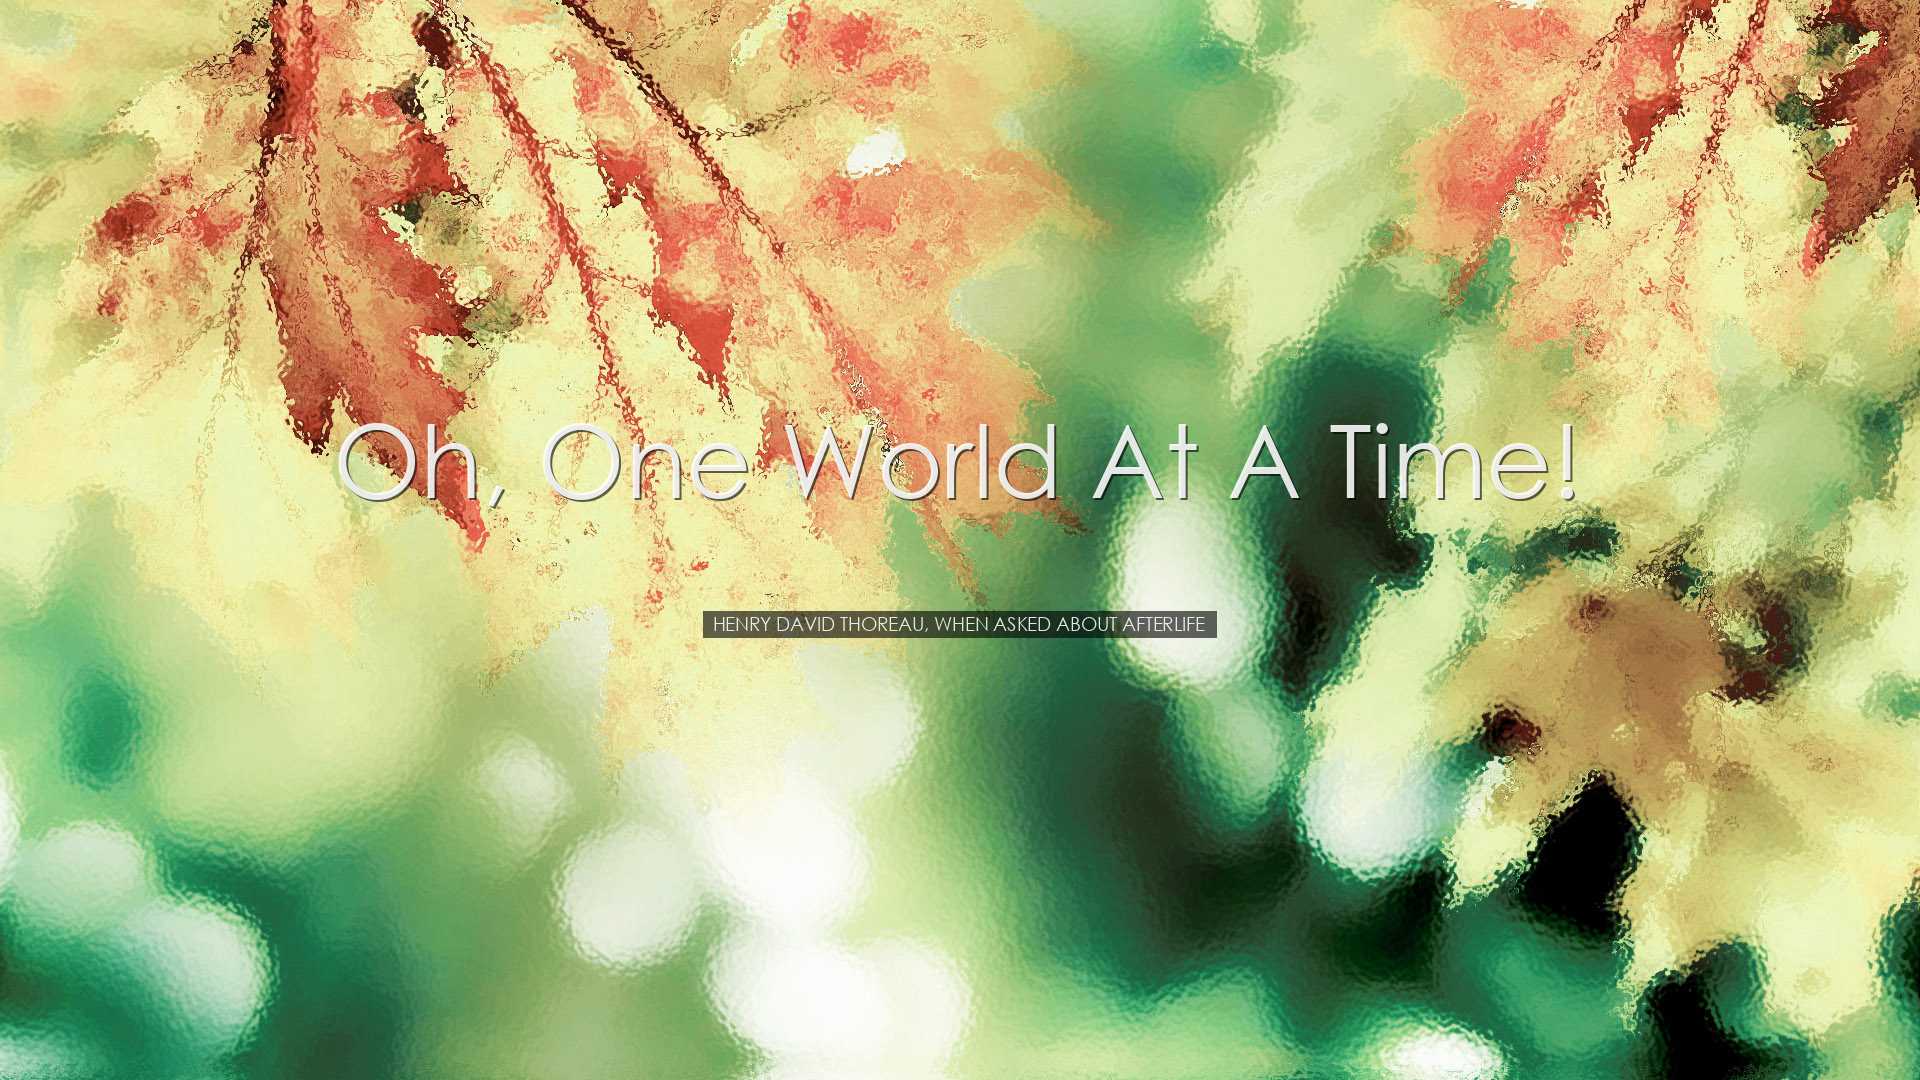 Oh, one world at a time! - Henry David Thoreau, when asked about a